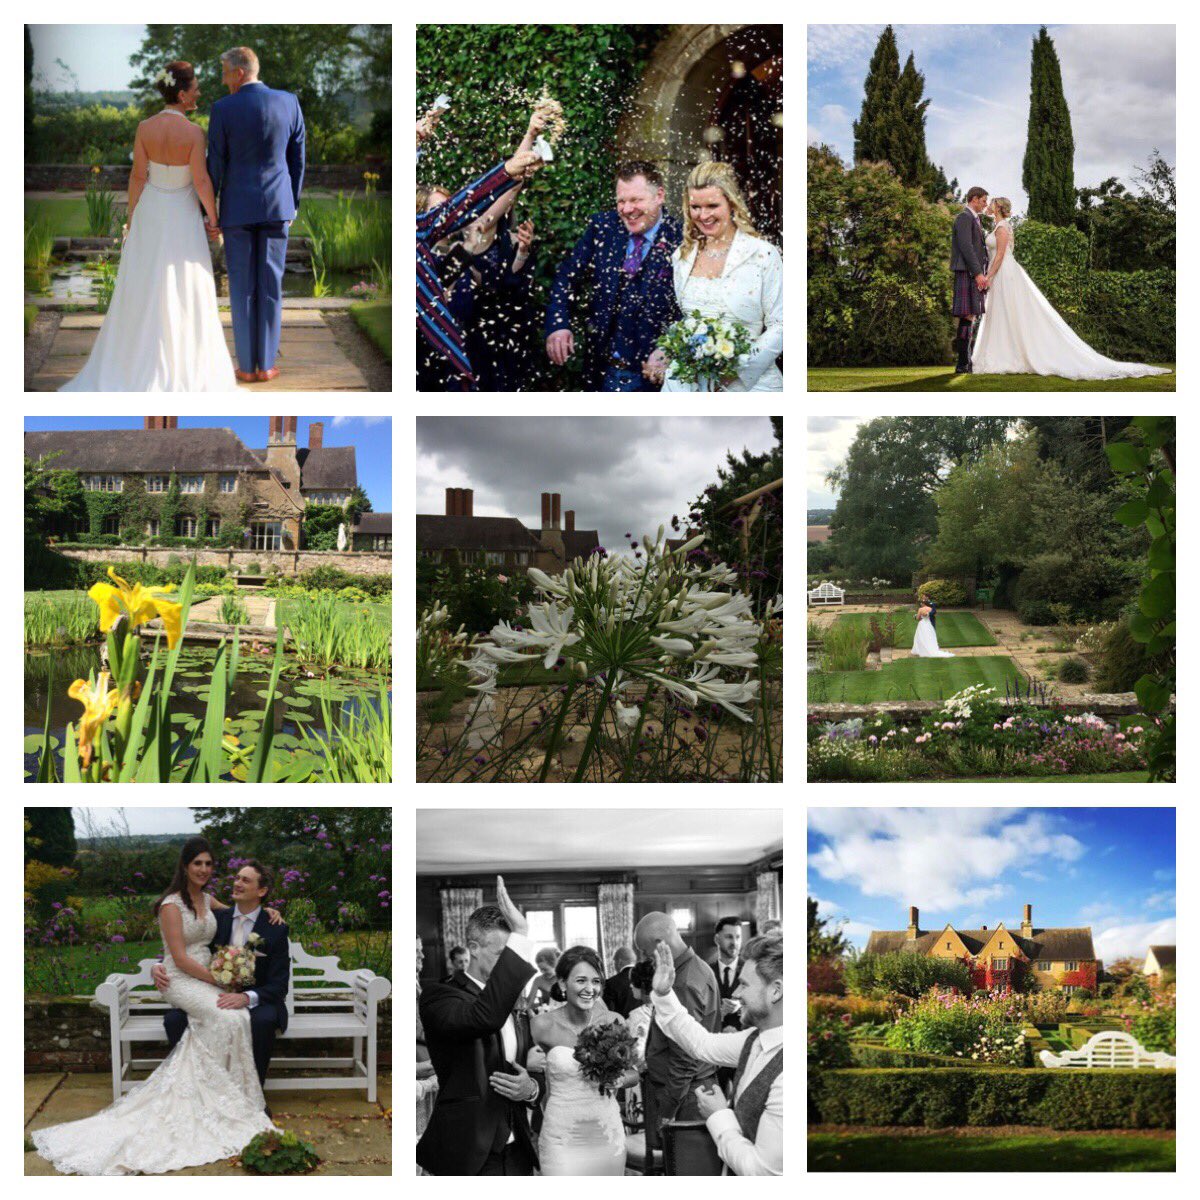 Looking for a wedding venue @MidlandsHour #Midlandshour we would love to show you around #leamingtonspa #warwickshire @Mallory_events